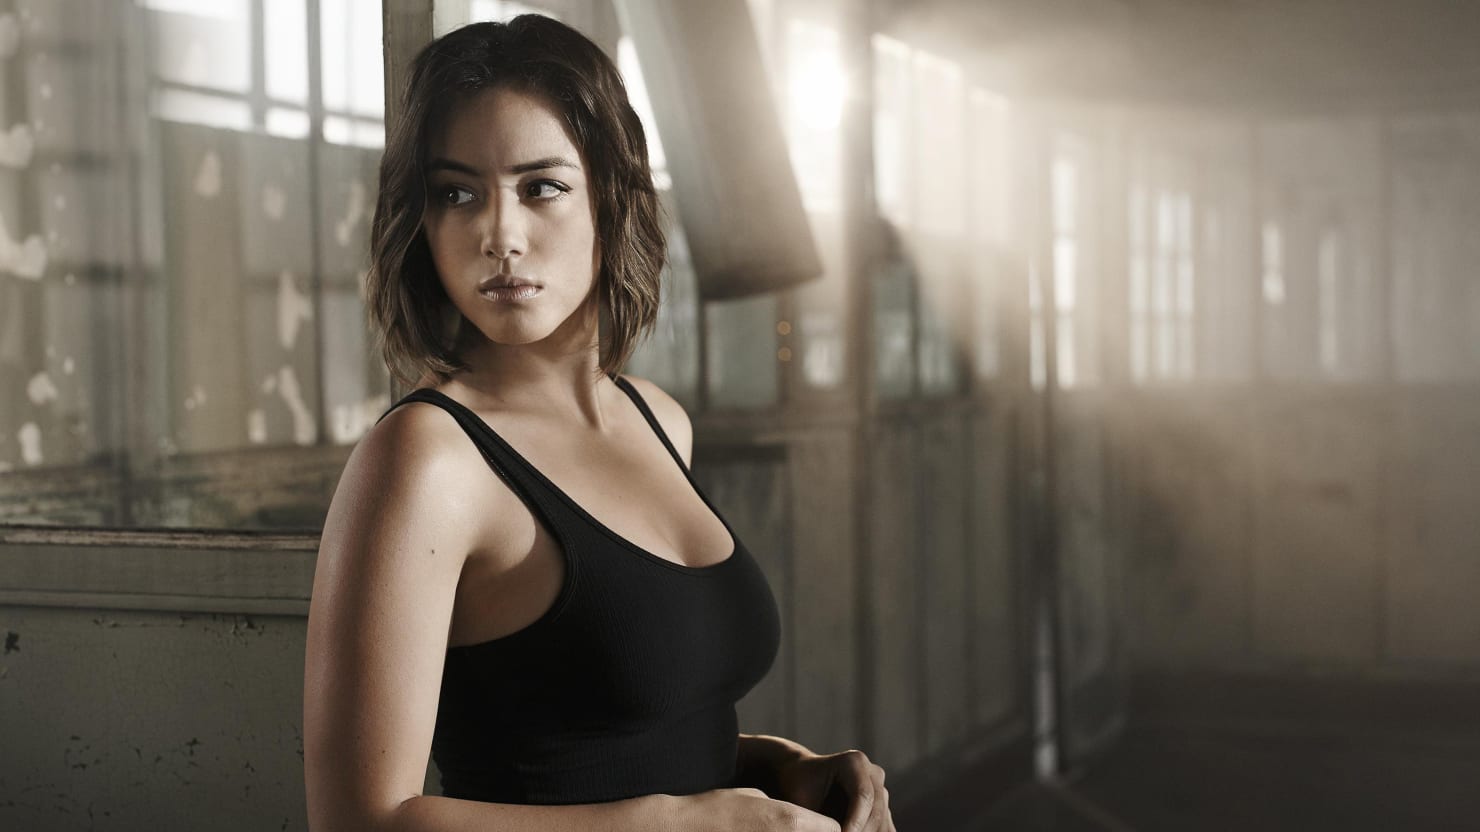 christopher vicari recommends chloe bennet boob flash pic